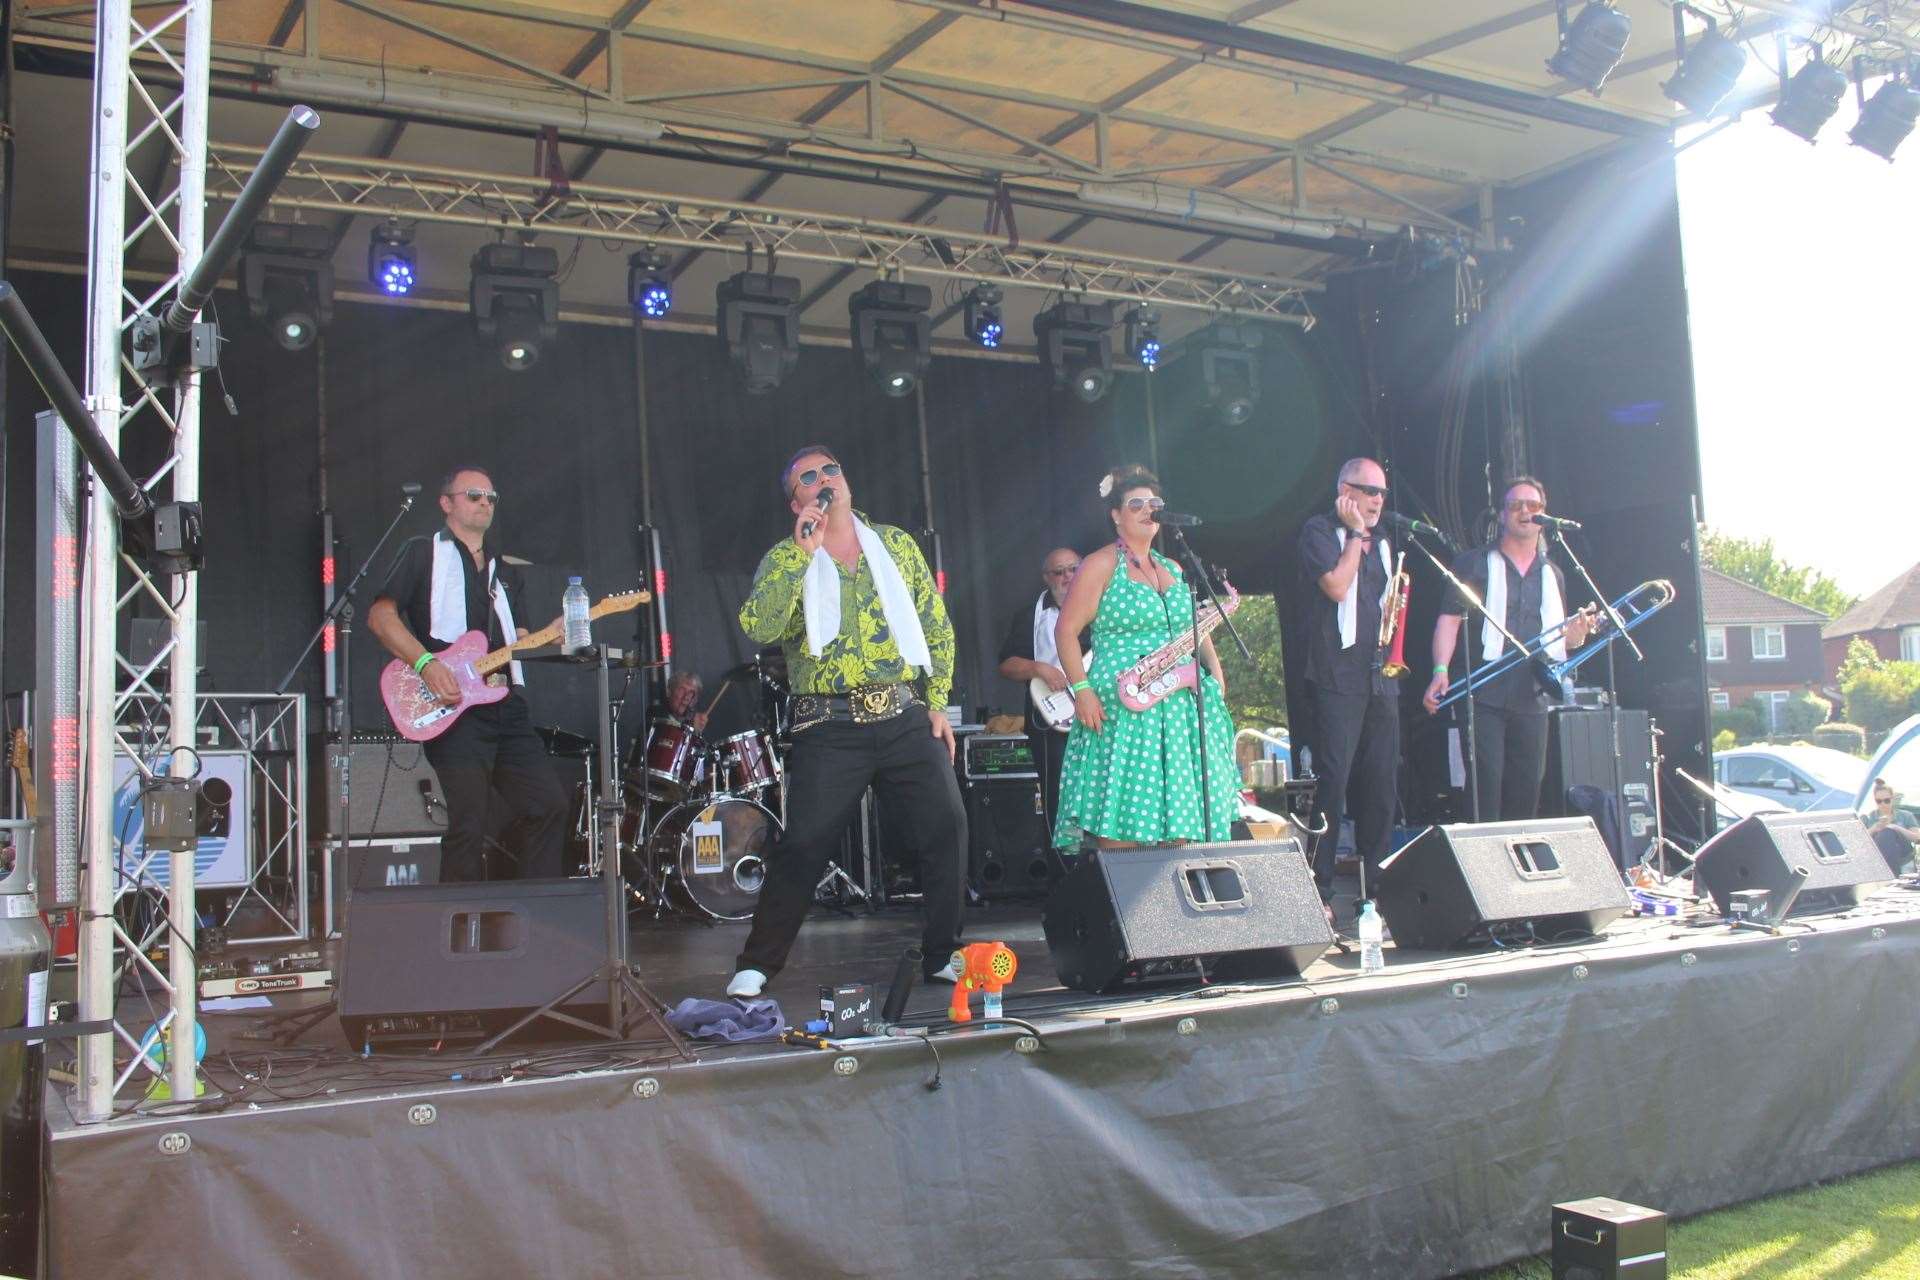 Taking Care of Vegas at Party in the Park at Sittingbourne on Saturday last year. They are booked at Blue Town's Criterion Theatre later this year. Picture: John Nurden